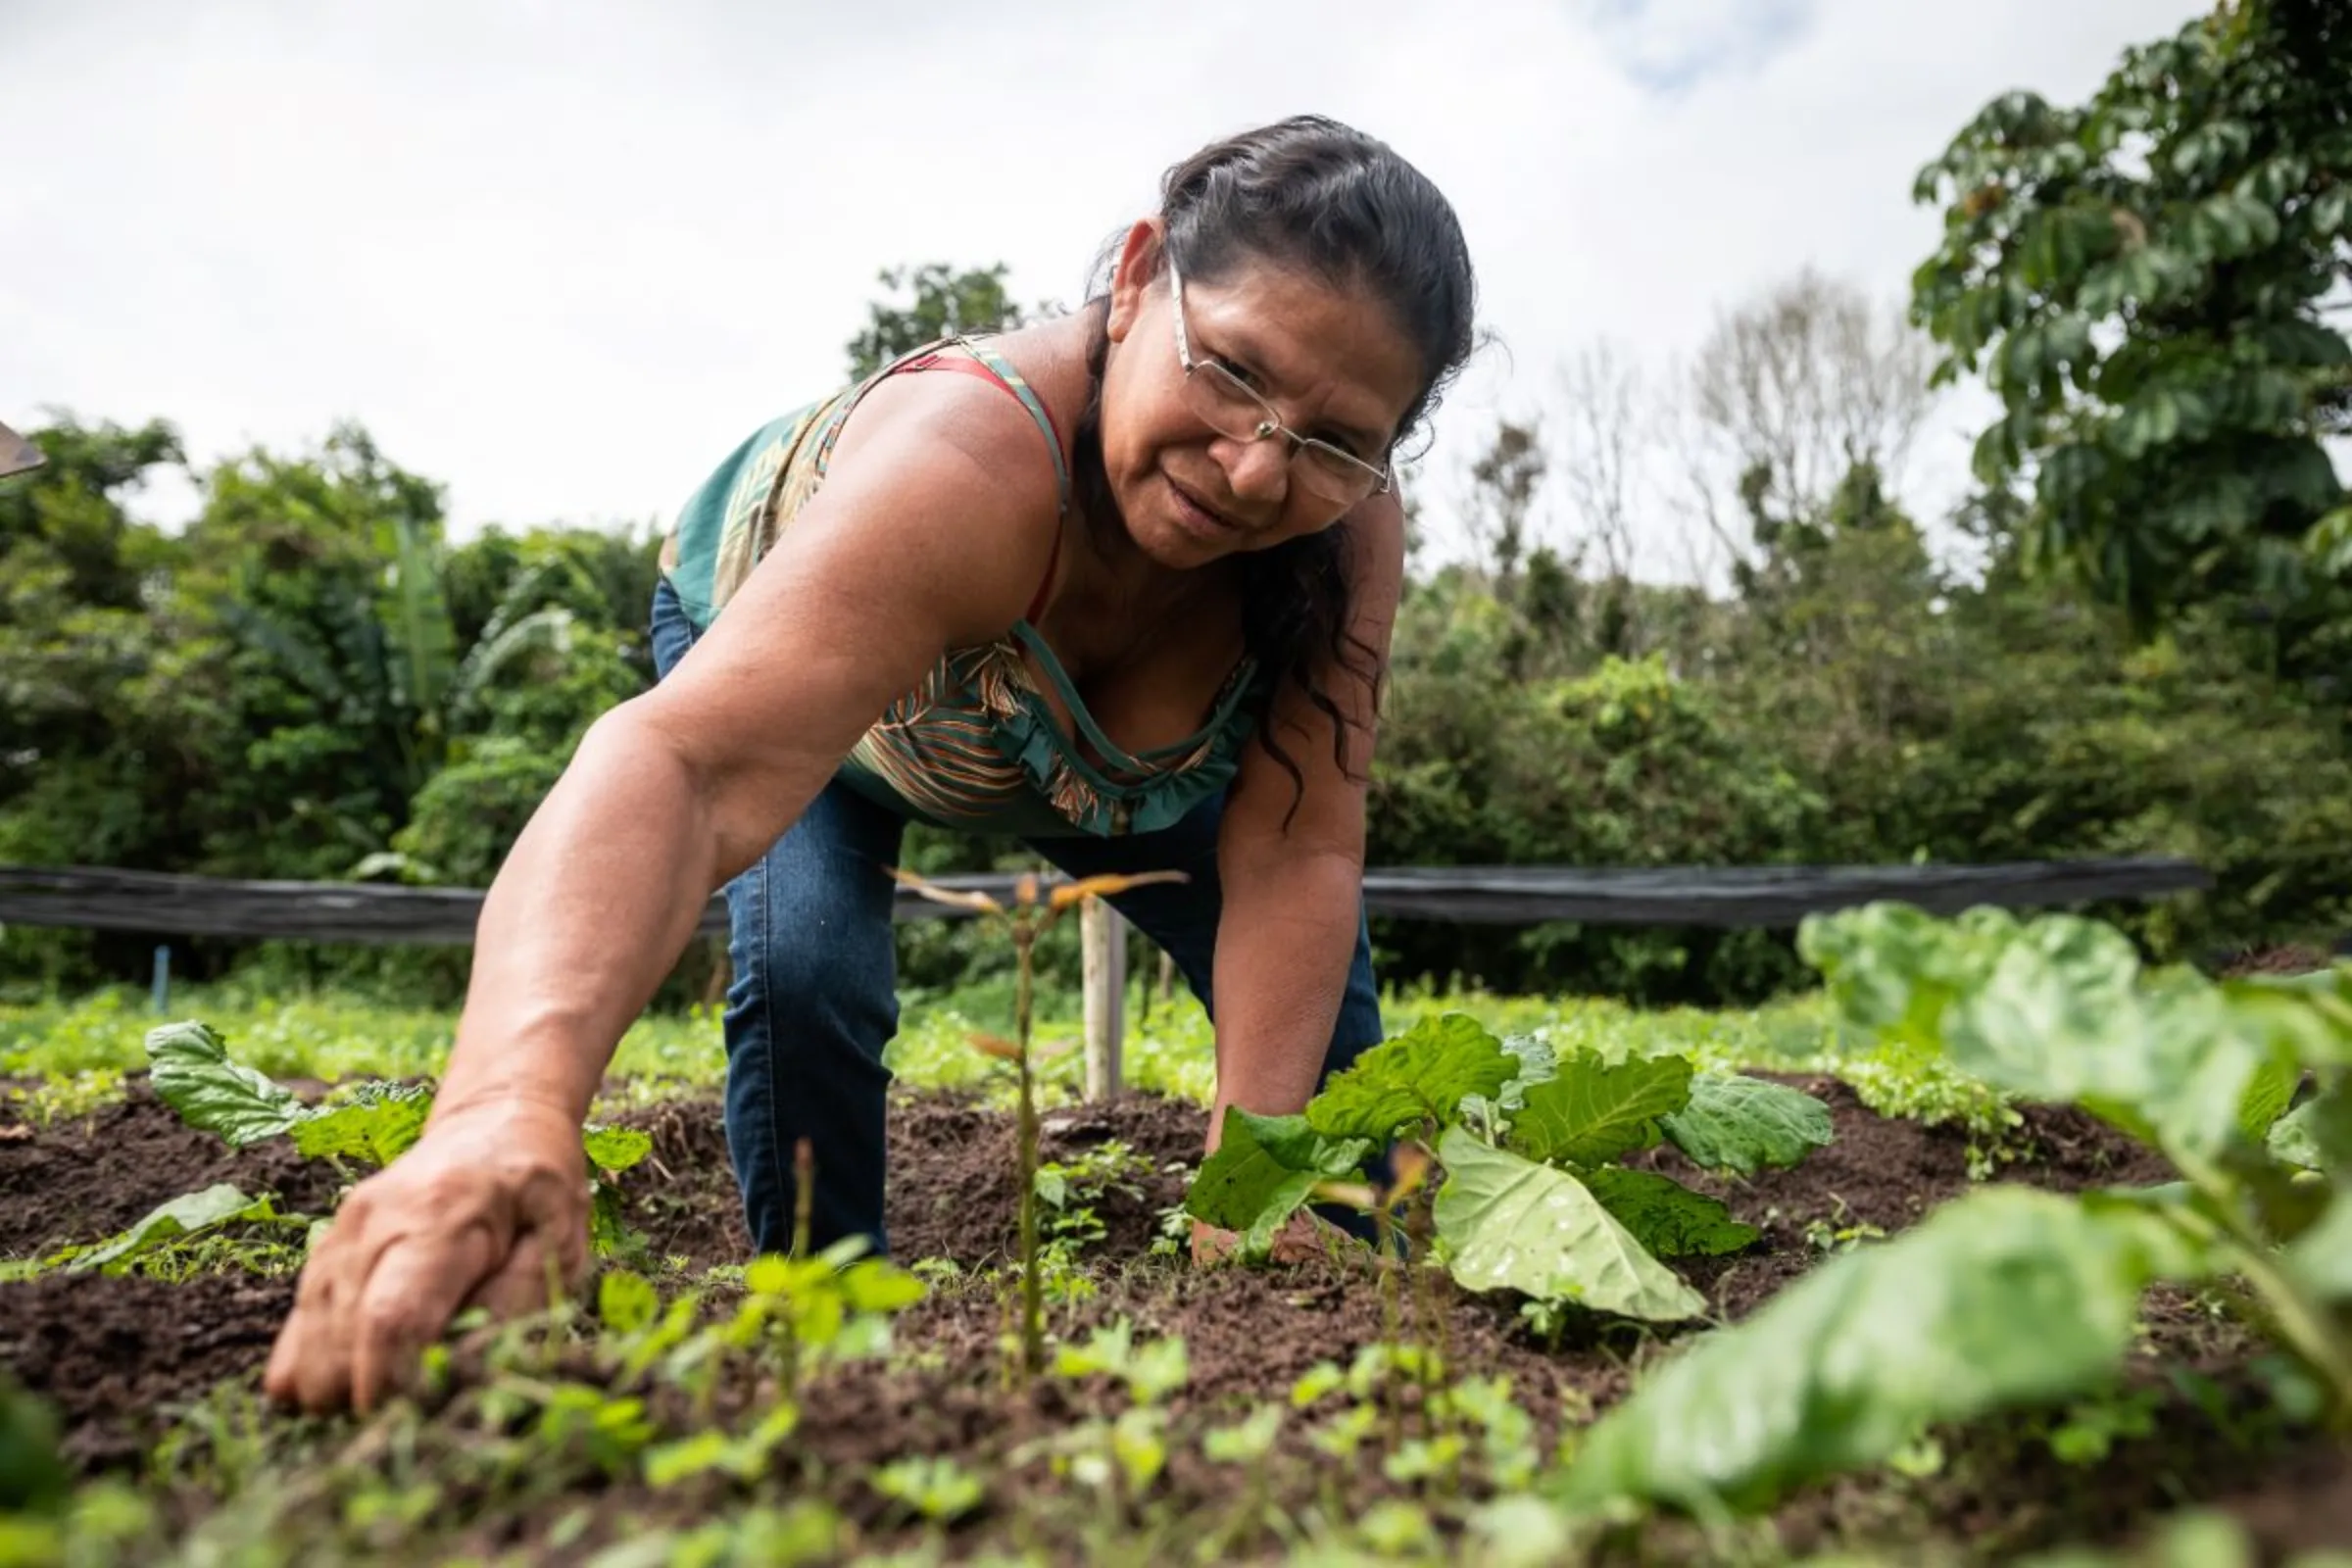 An Aprocamp member picks herbs at the co-operative’s garden in Pará, Brazil, January 18, 2023. Thomson Reuters Foundation/Cícero Pedrosa Neto